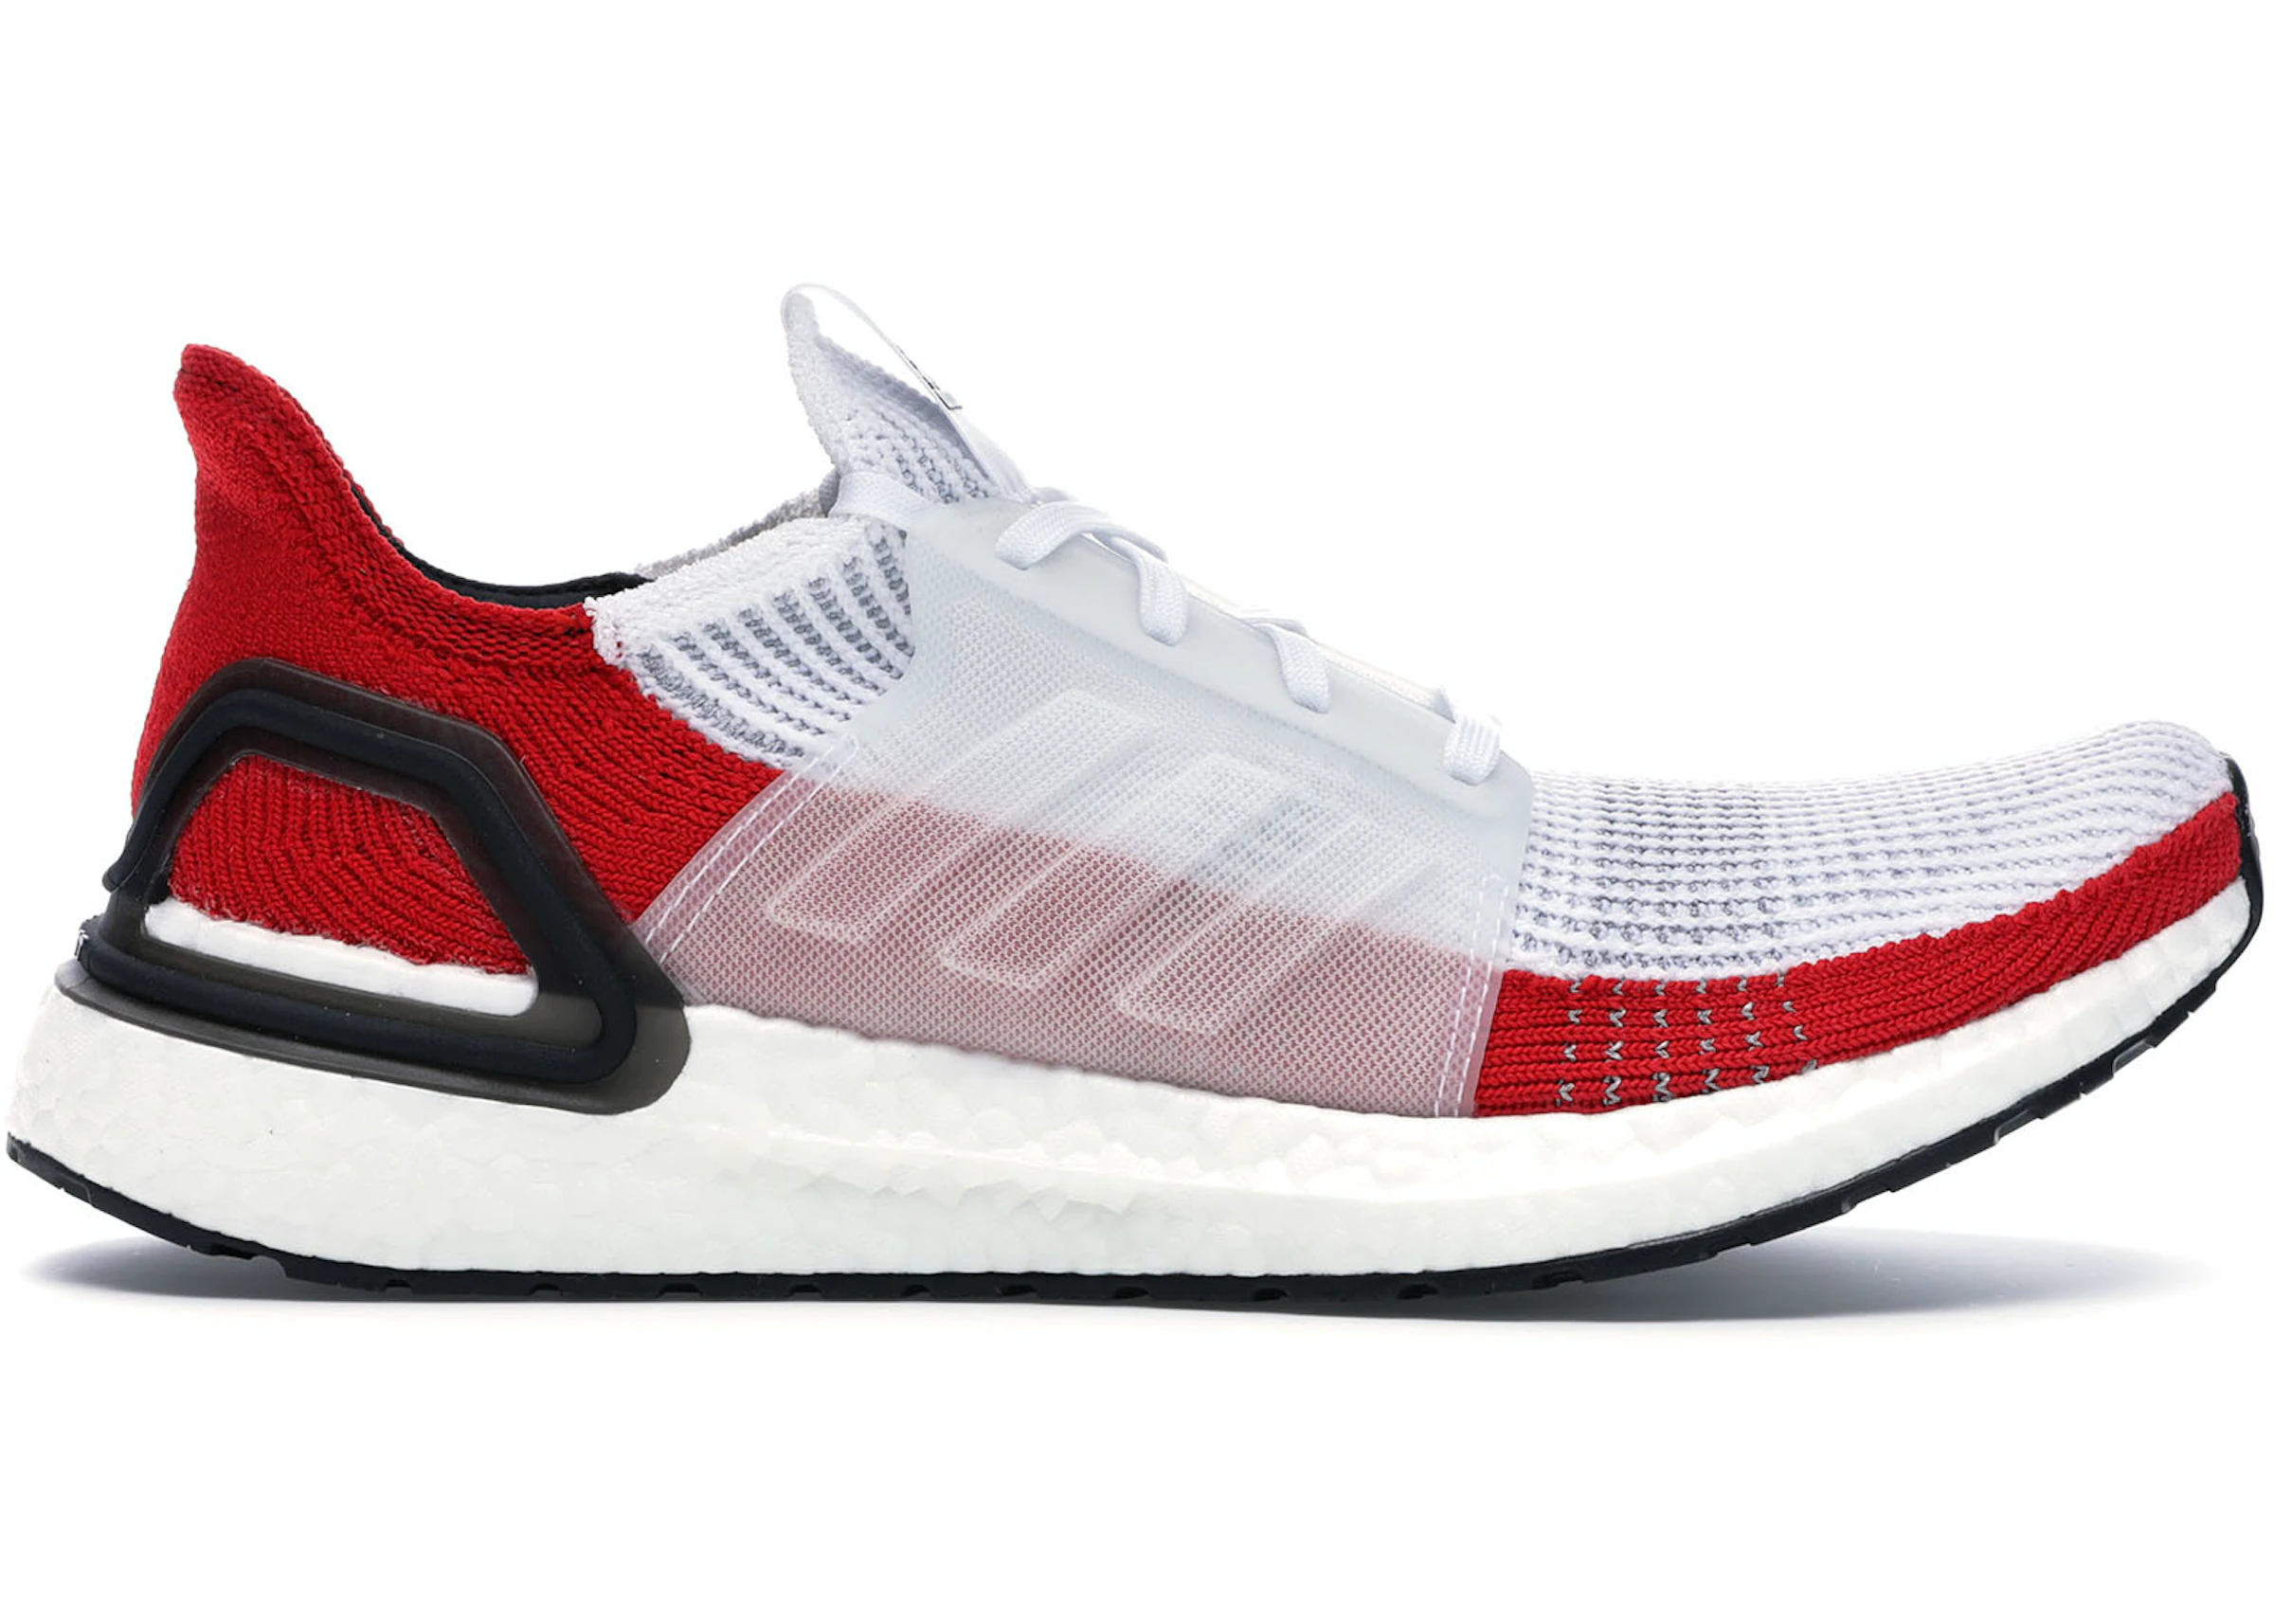 President Warmth camp adidas Ultra Boost 19 White Scarlet - EF1341 - US